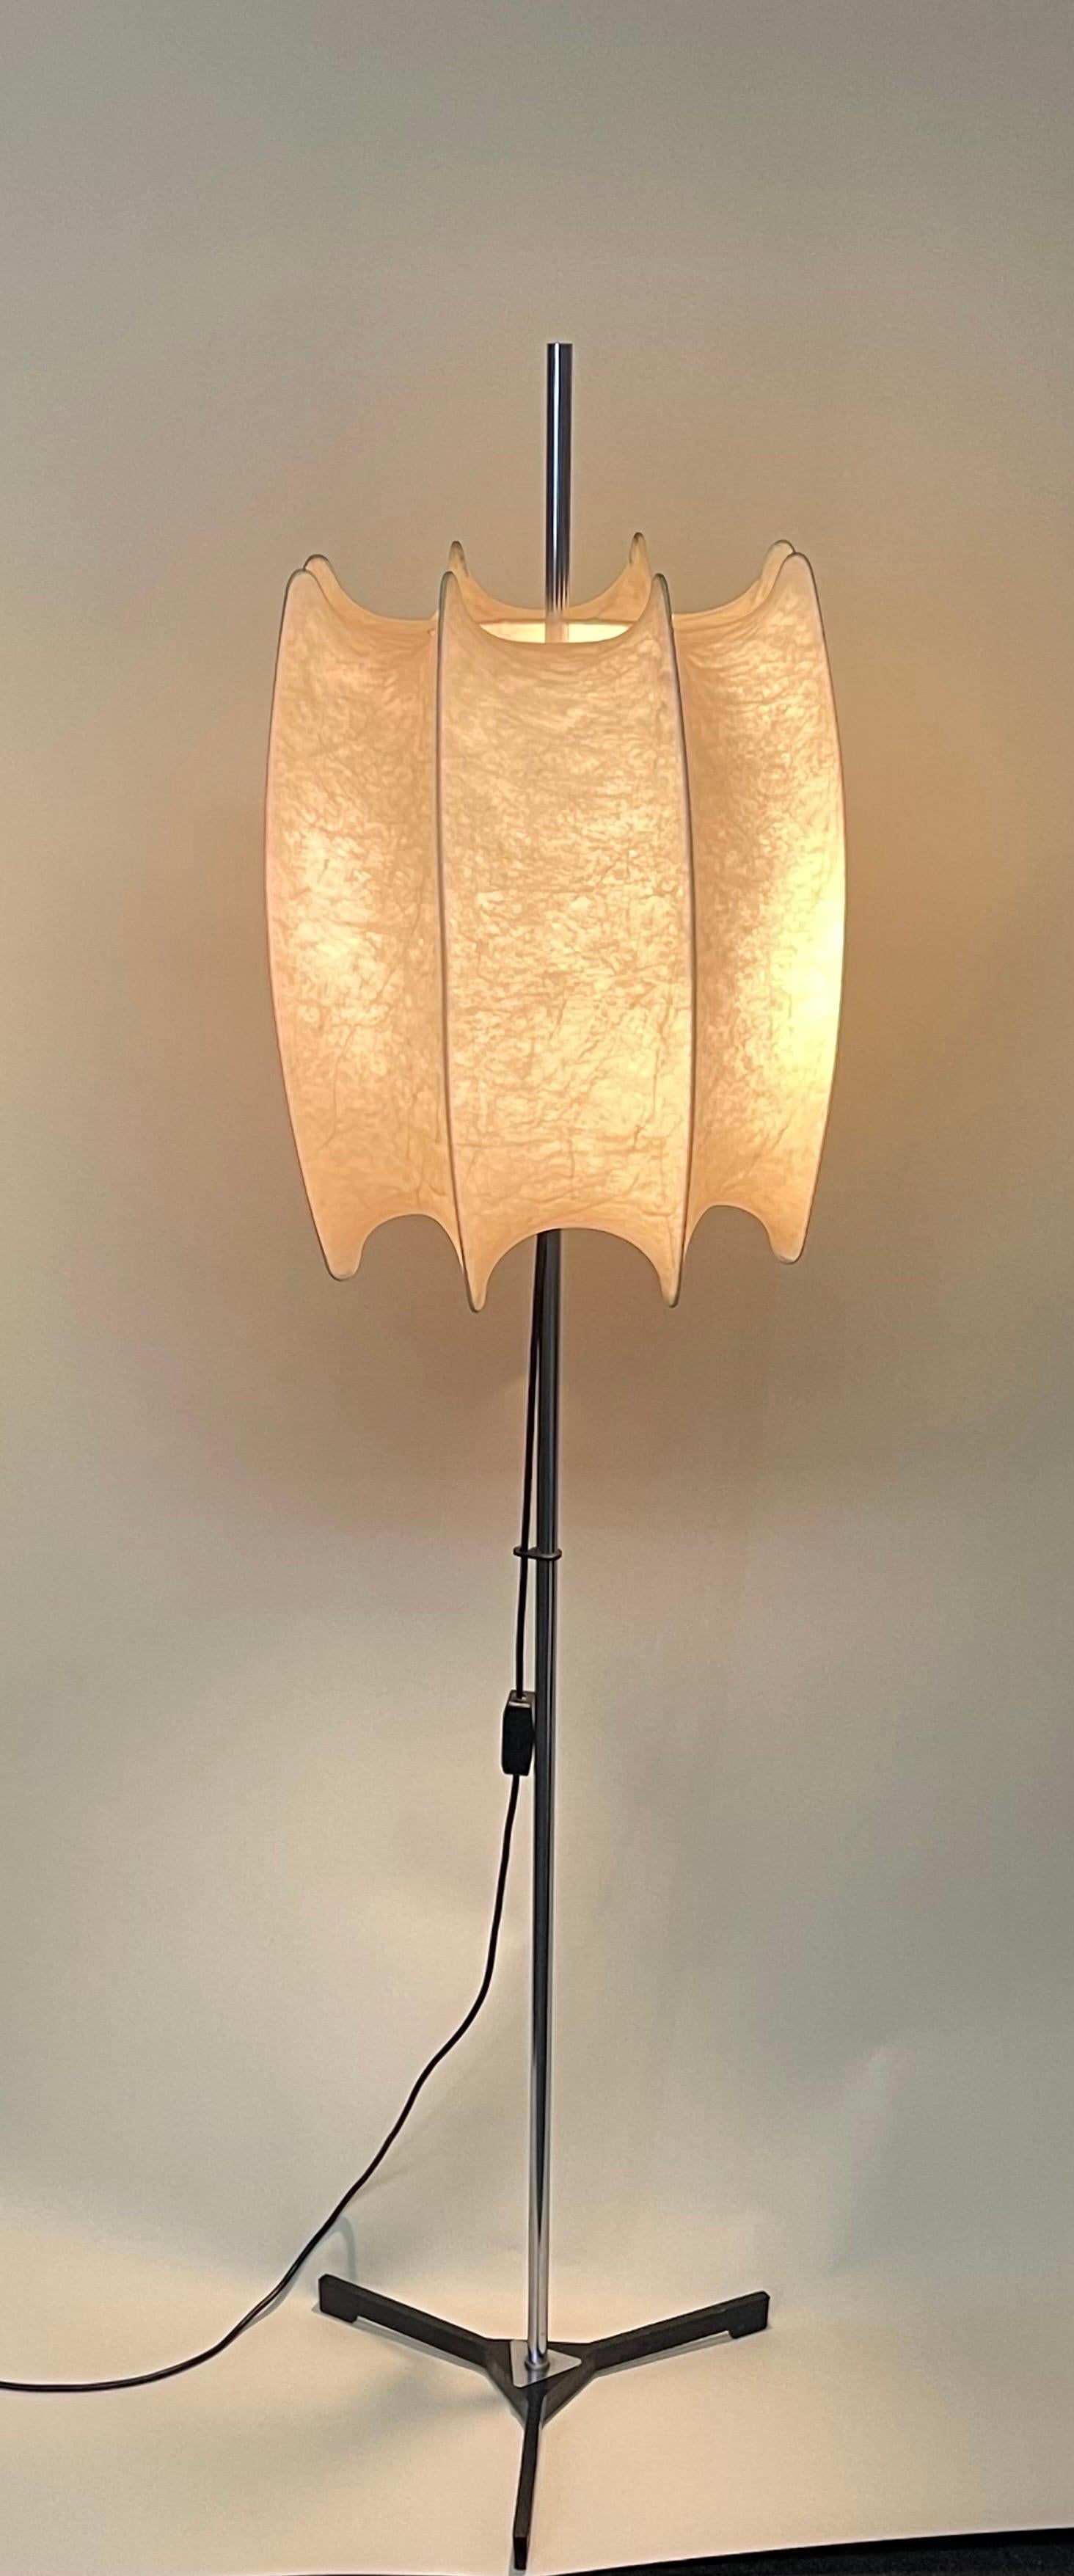 Mid-Century Modern Midcentury Cocoon Floor Lamp Attributed to Goldkant Leuchten, circa 1960s For Sale